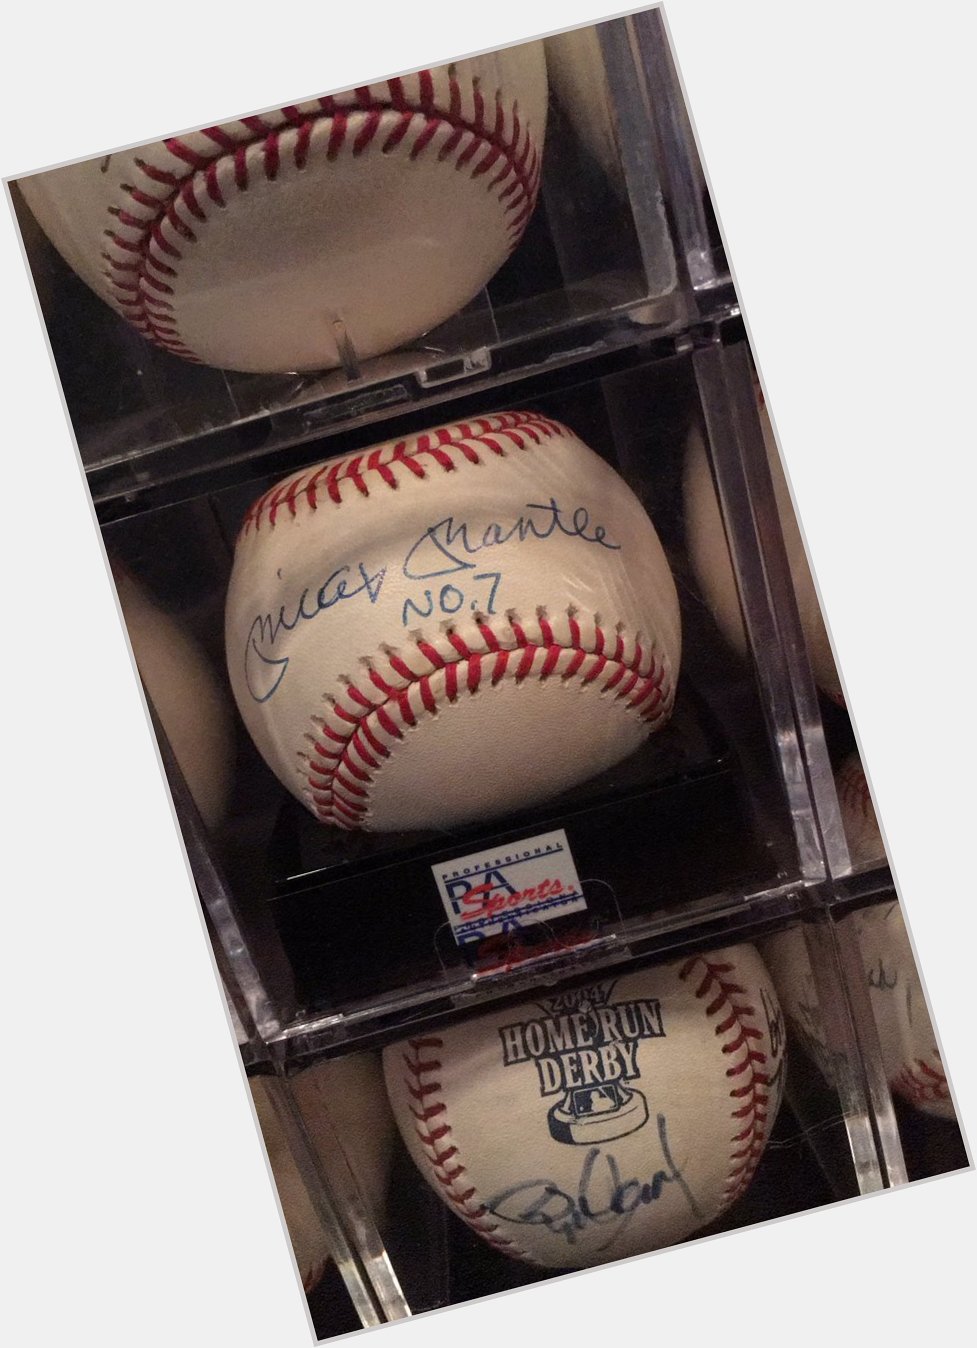 Happy Birthday, Mickey Mantle. Out of all my autographs, this has always been my favorite. 